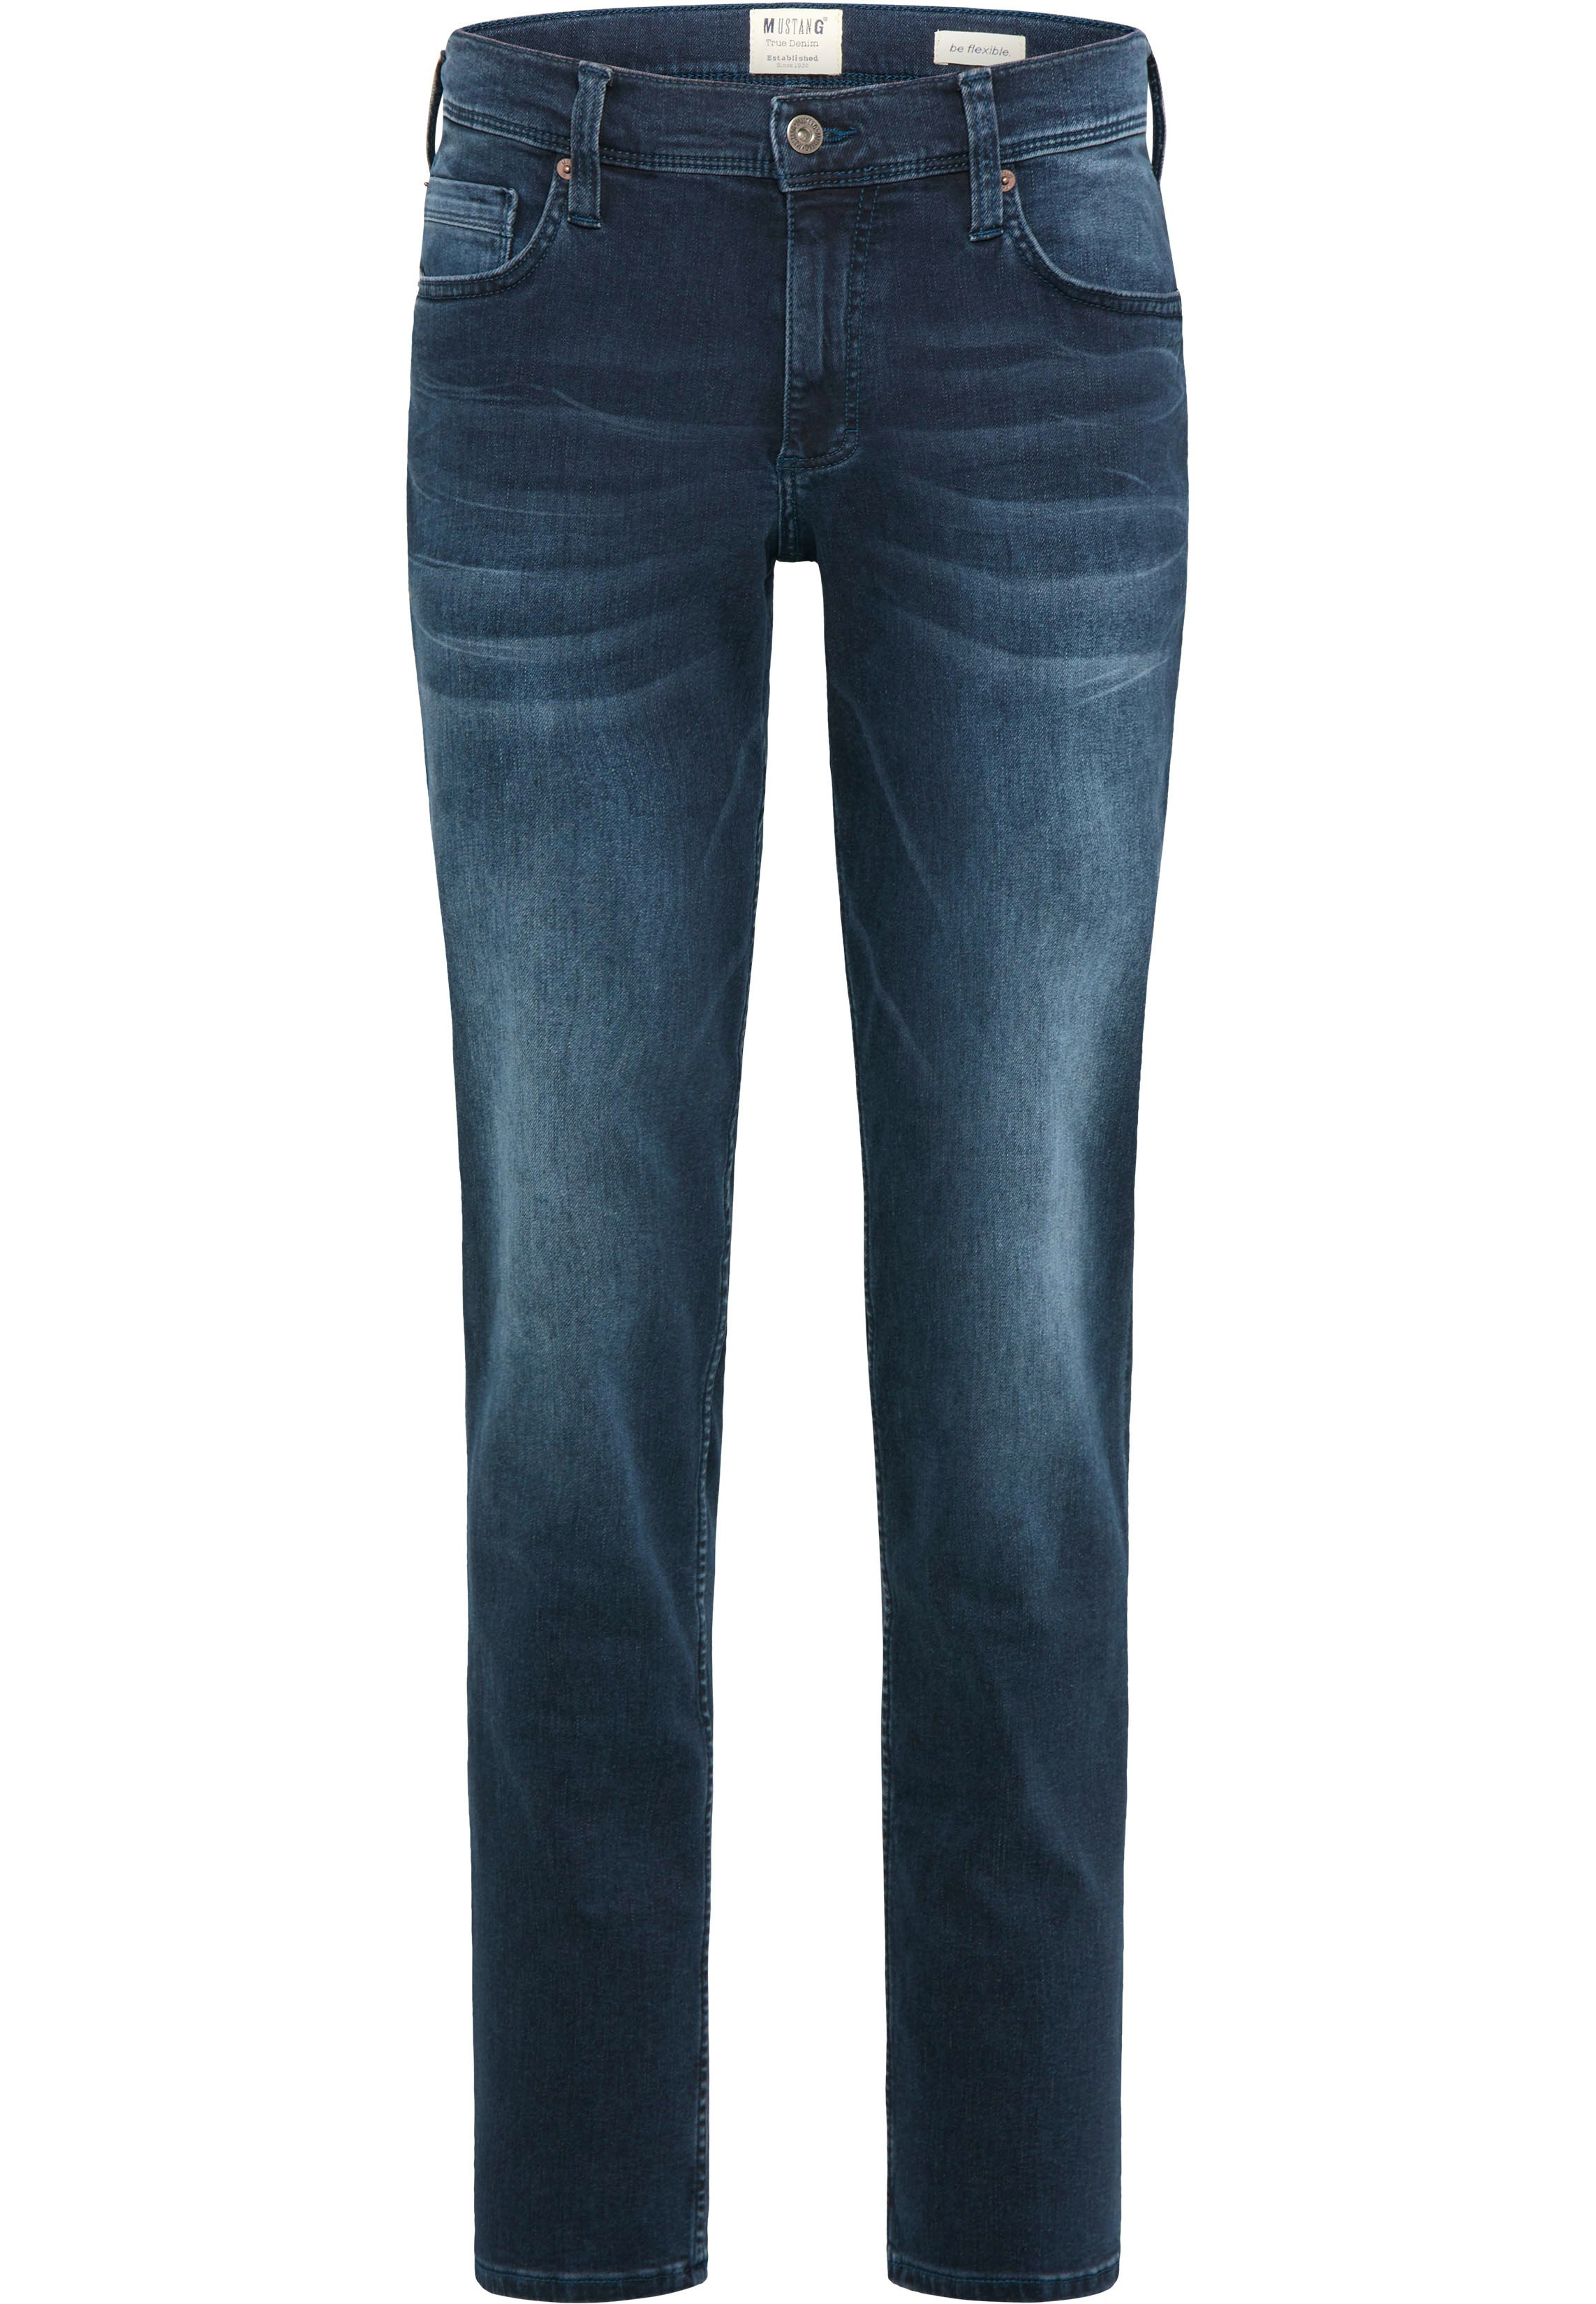 Mustang Washington Jeans Slim Fit stone washed